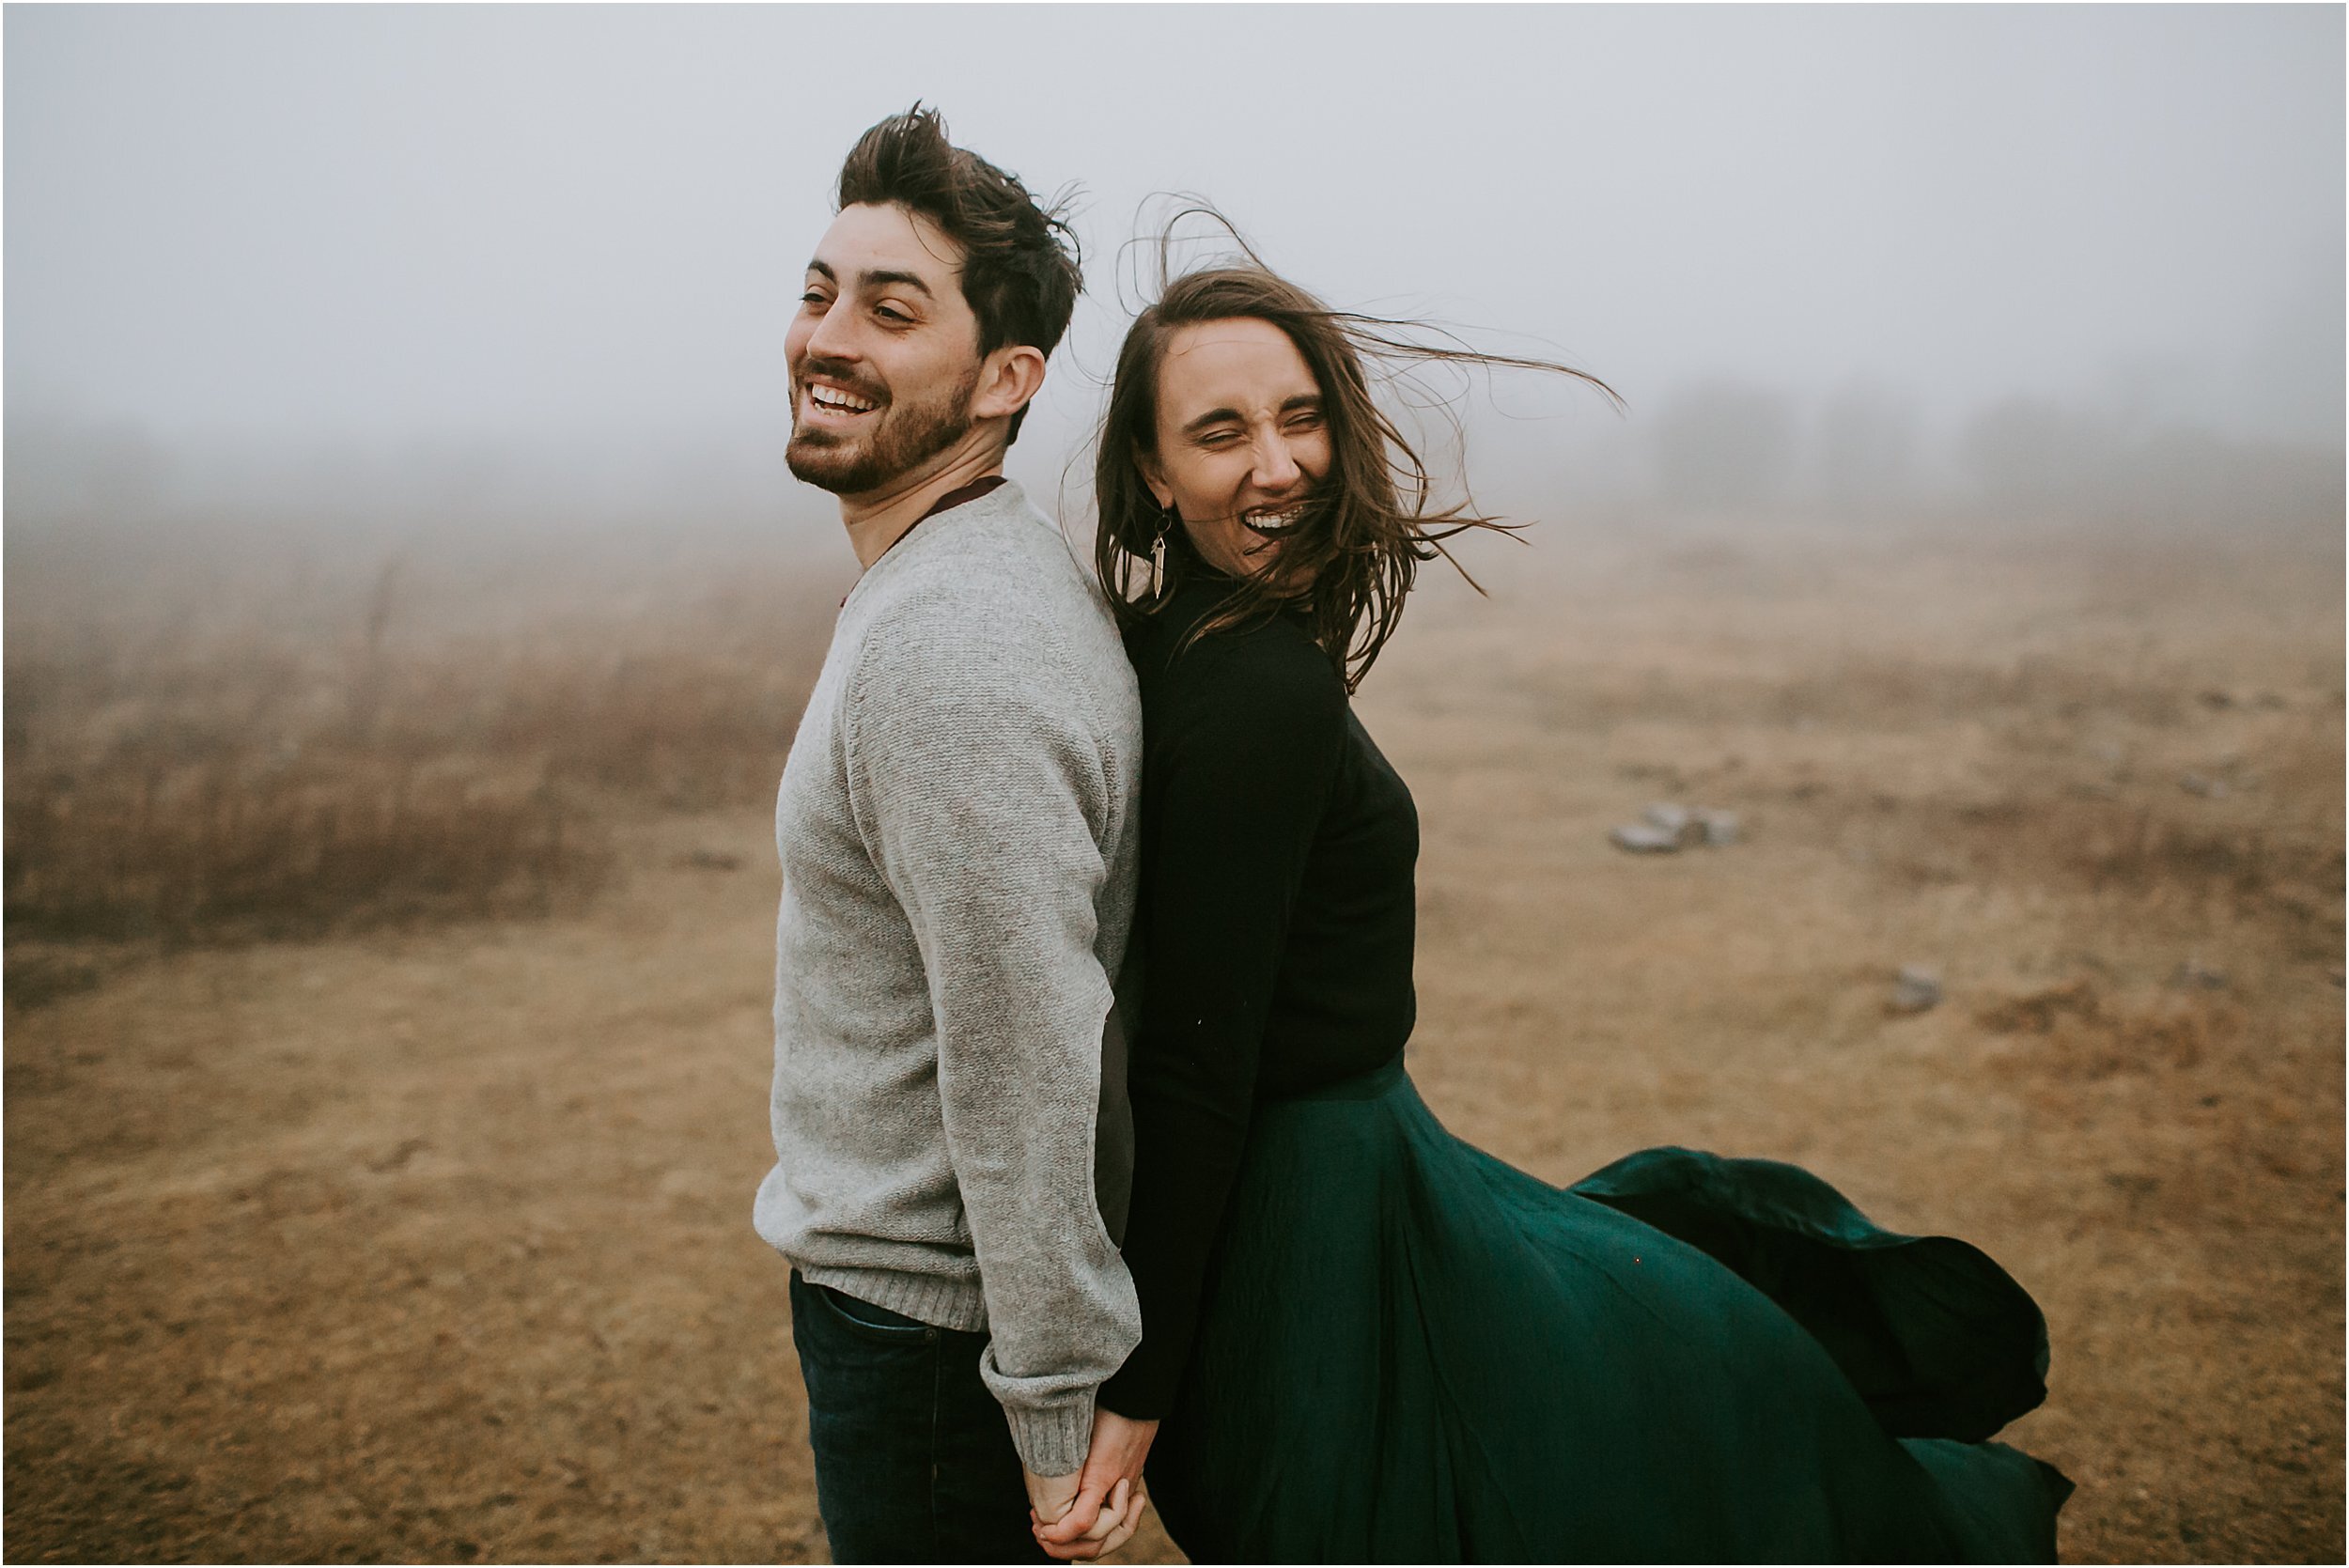  A couple stands back to back laughing while the wind blows intensely around them, their hair and clothes are flying in the wind. They are surrounded by a dense grey fog.  